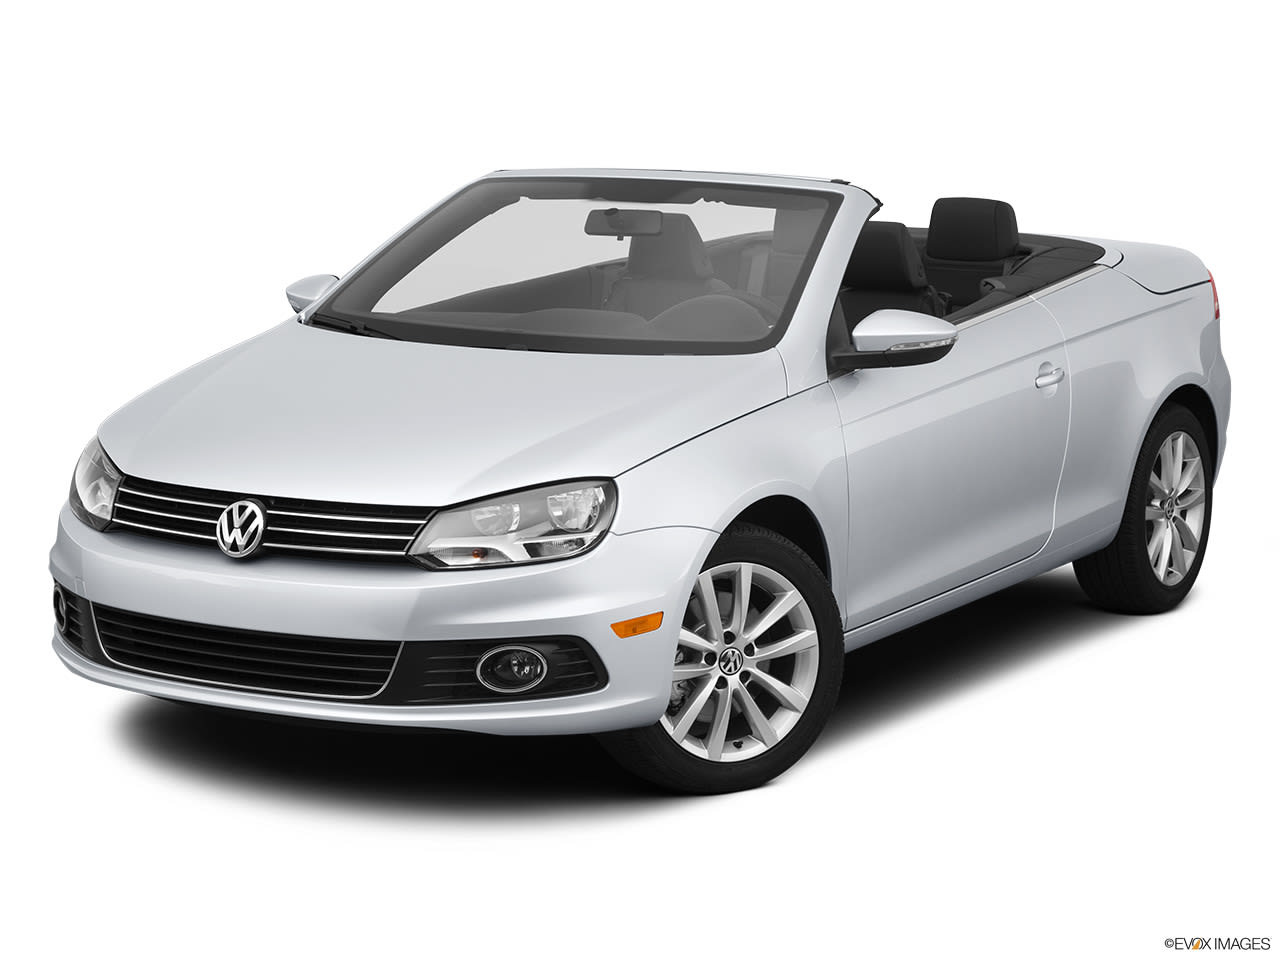 A Buyer's Guide to the 2012 Volkswagen Eos | YourMechanic Advice